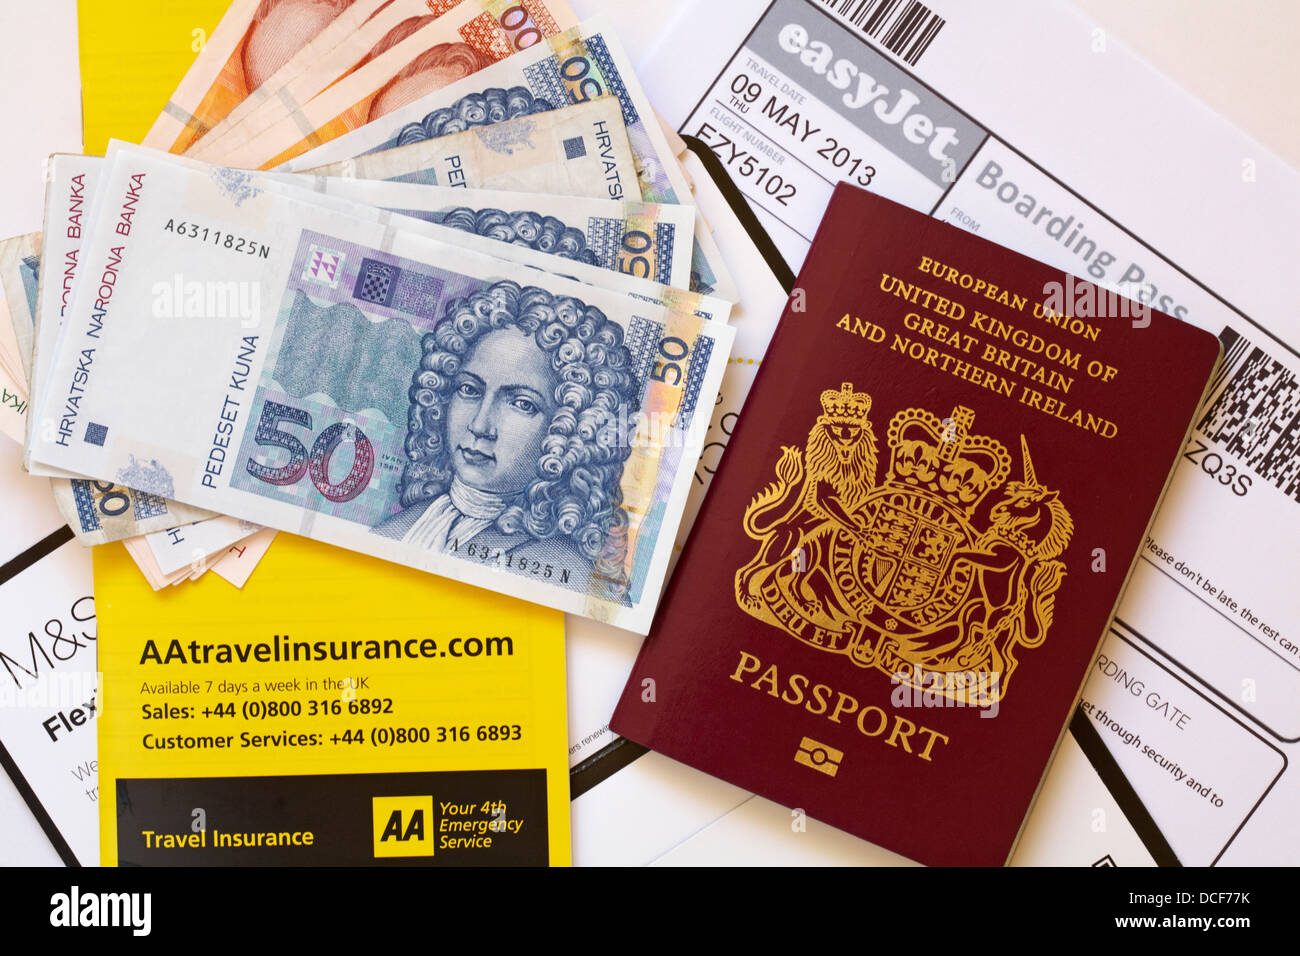 UK passport, travel insurance booklet, foreign currency money and Easyjet boarding pass ready for holiday to Croatia Stock Photo